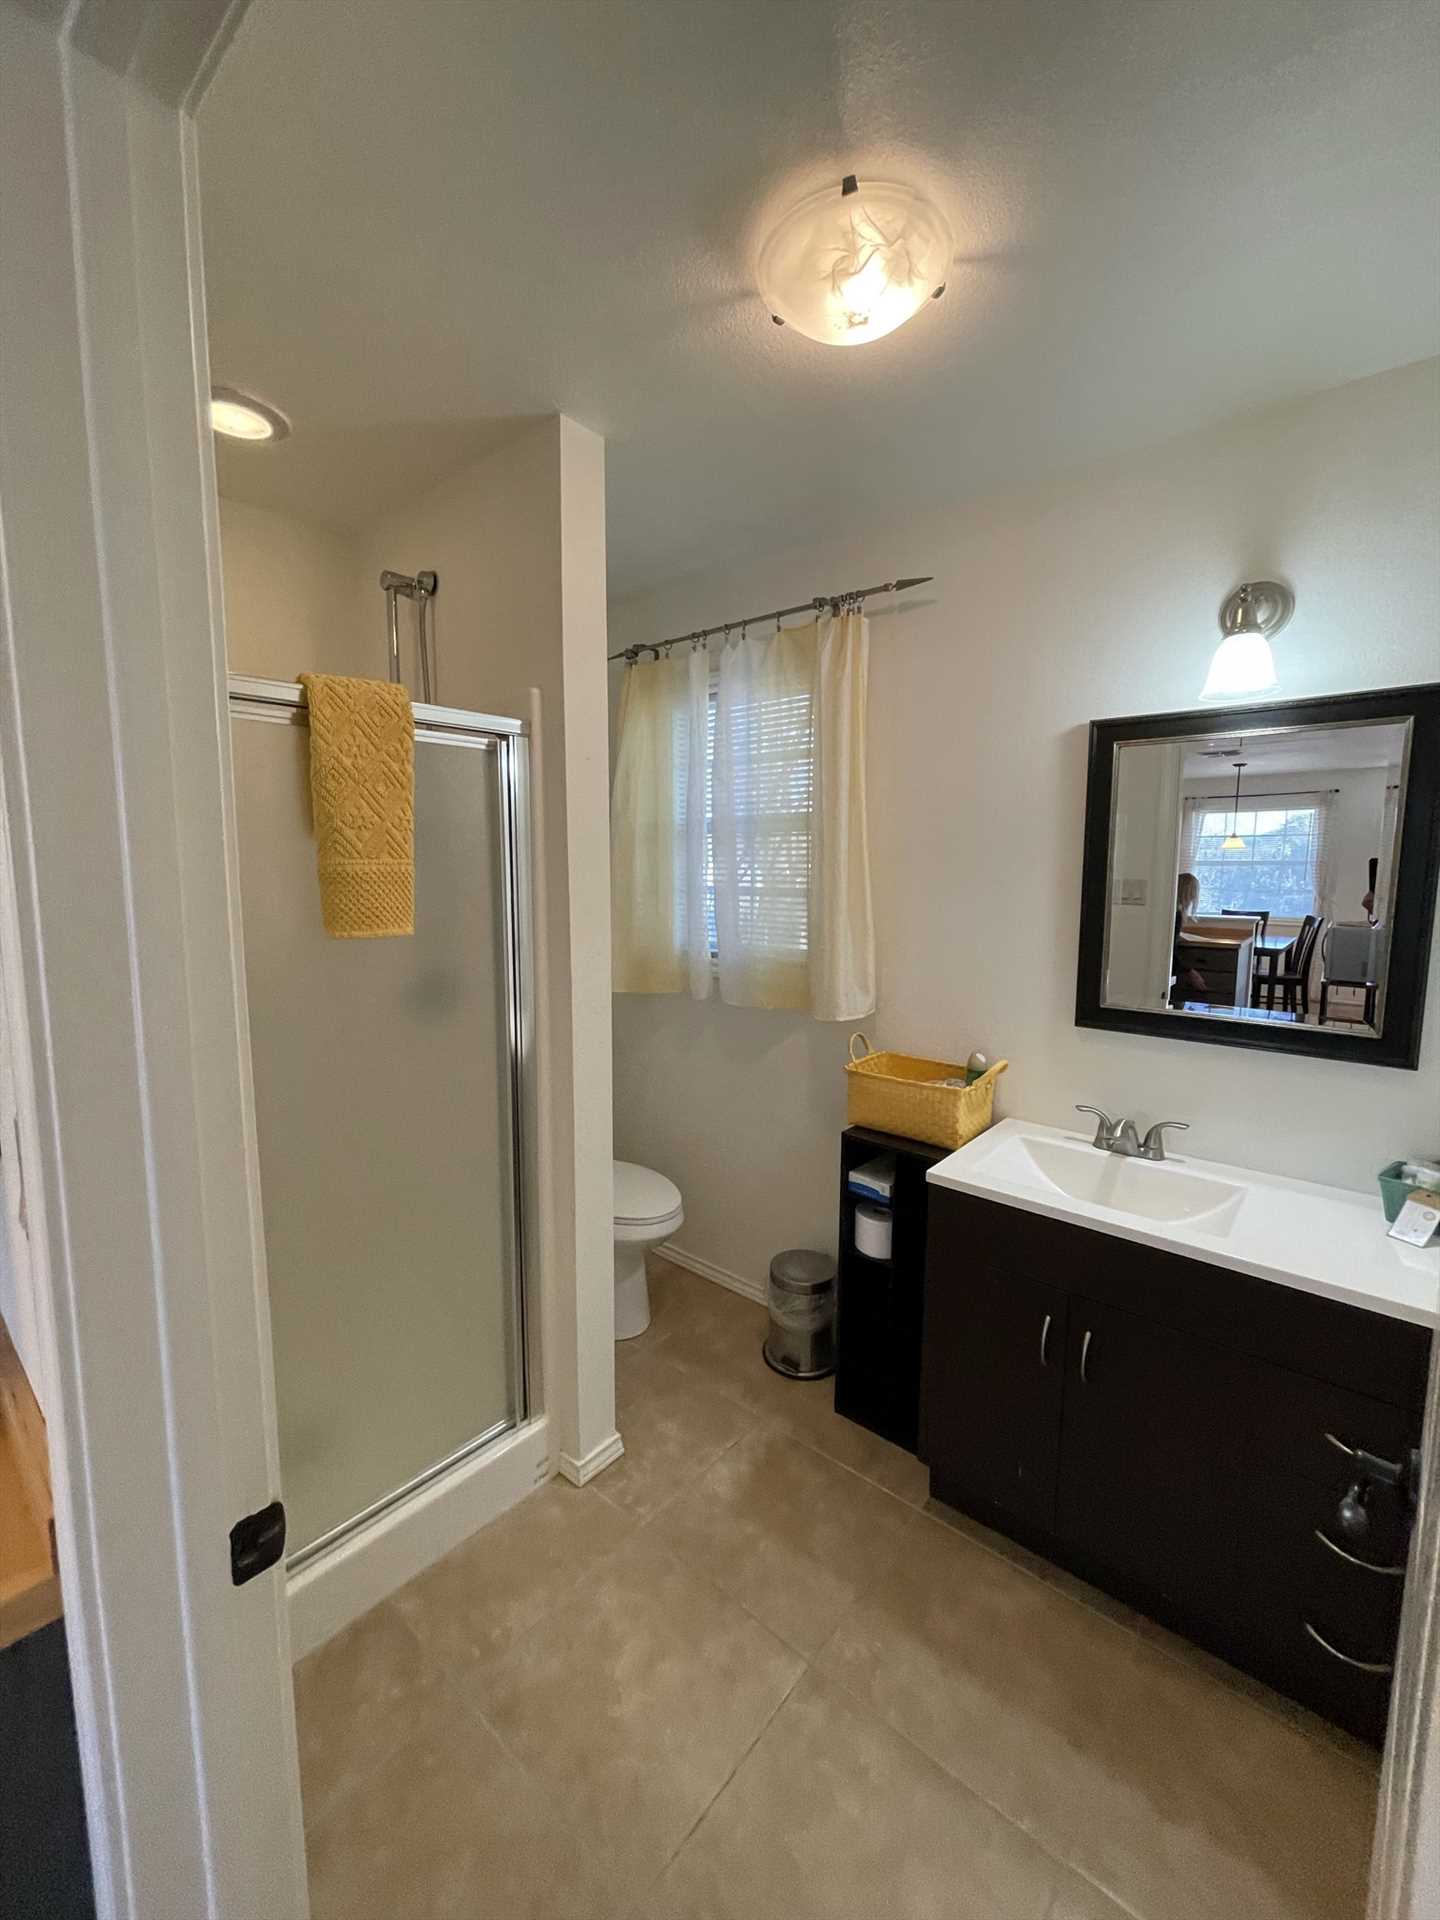                                                 A shower stall and fresh linens complete the full bath here, and it's a spotless place to clean up!